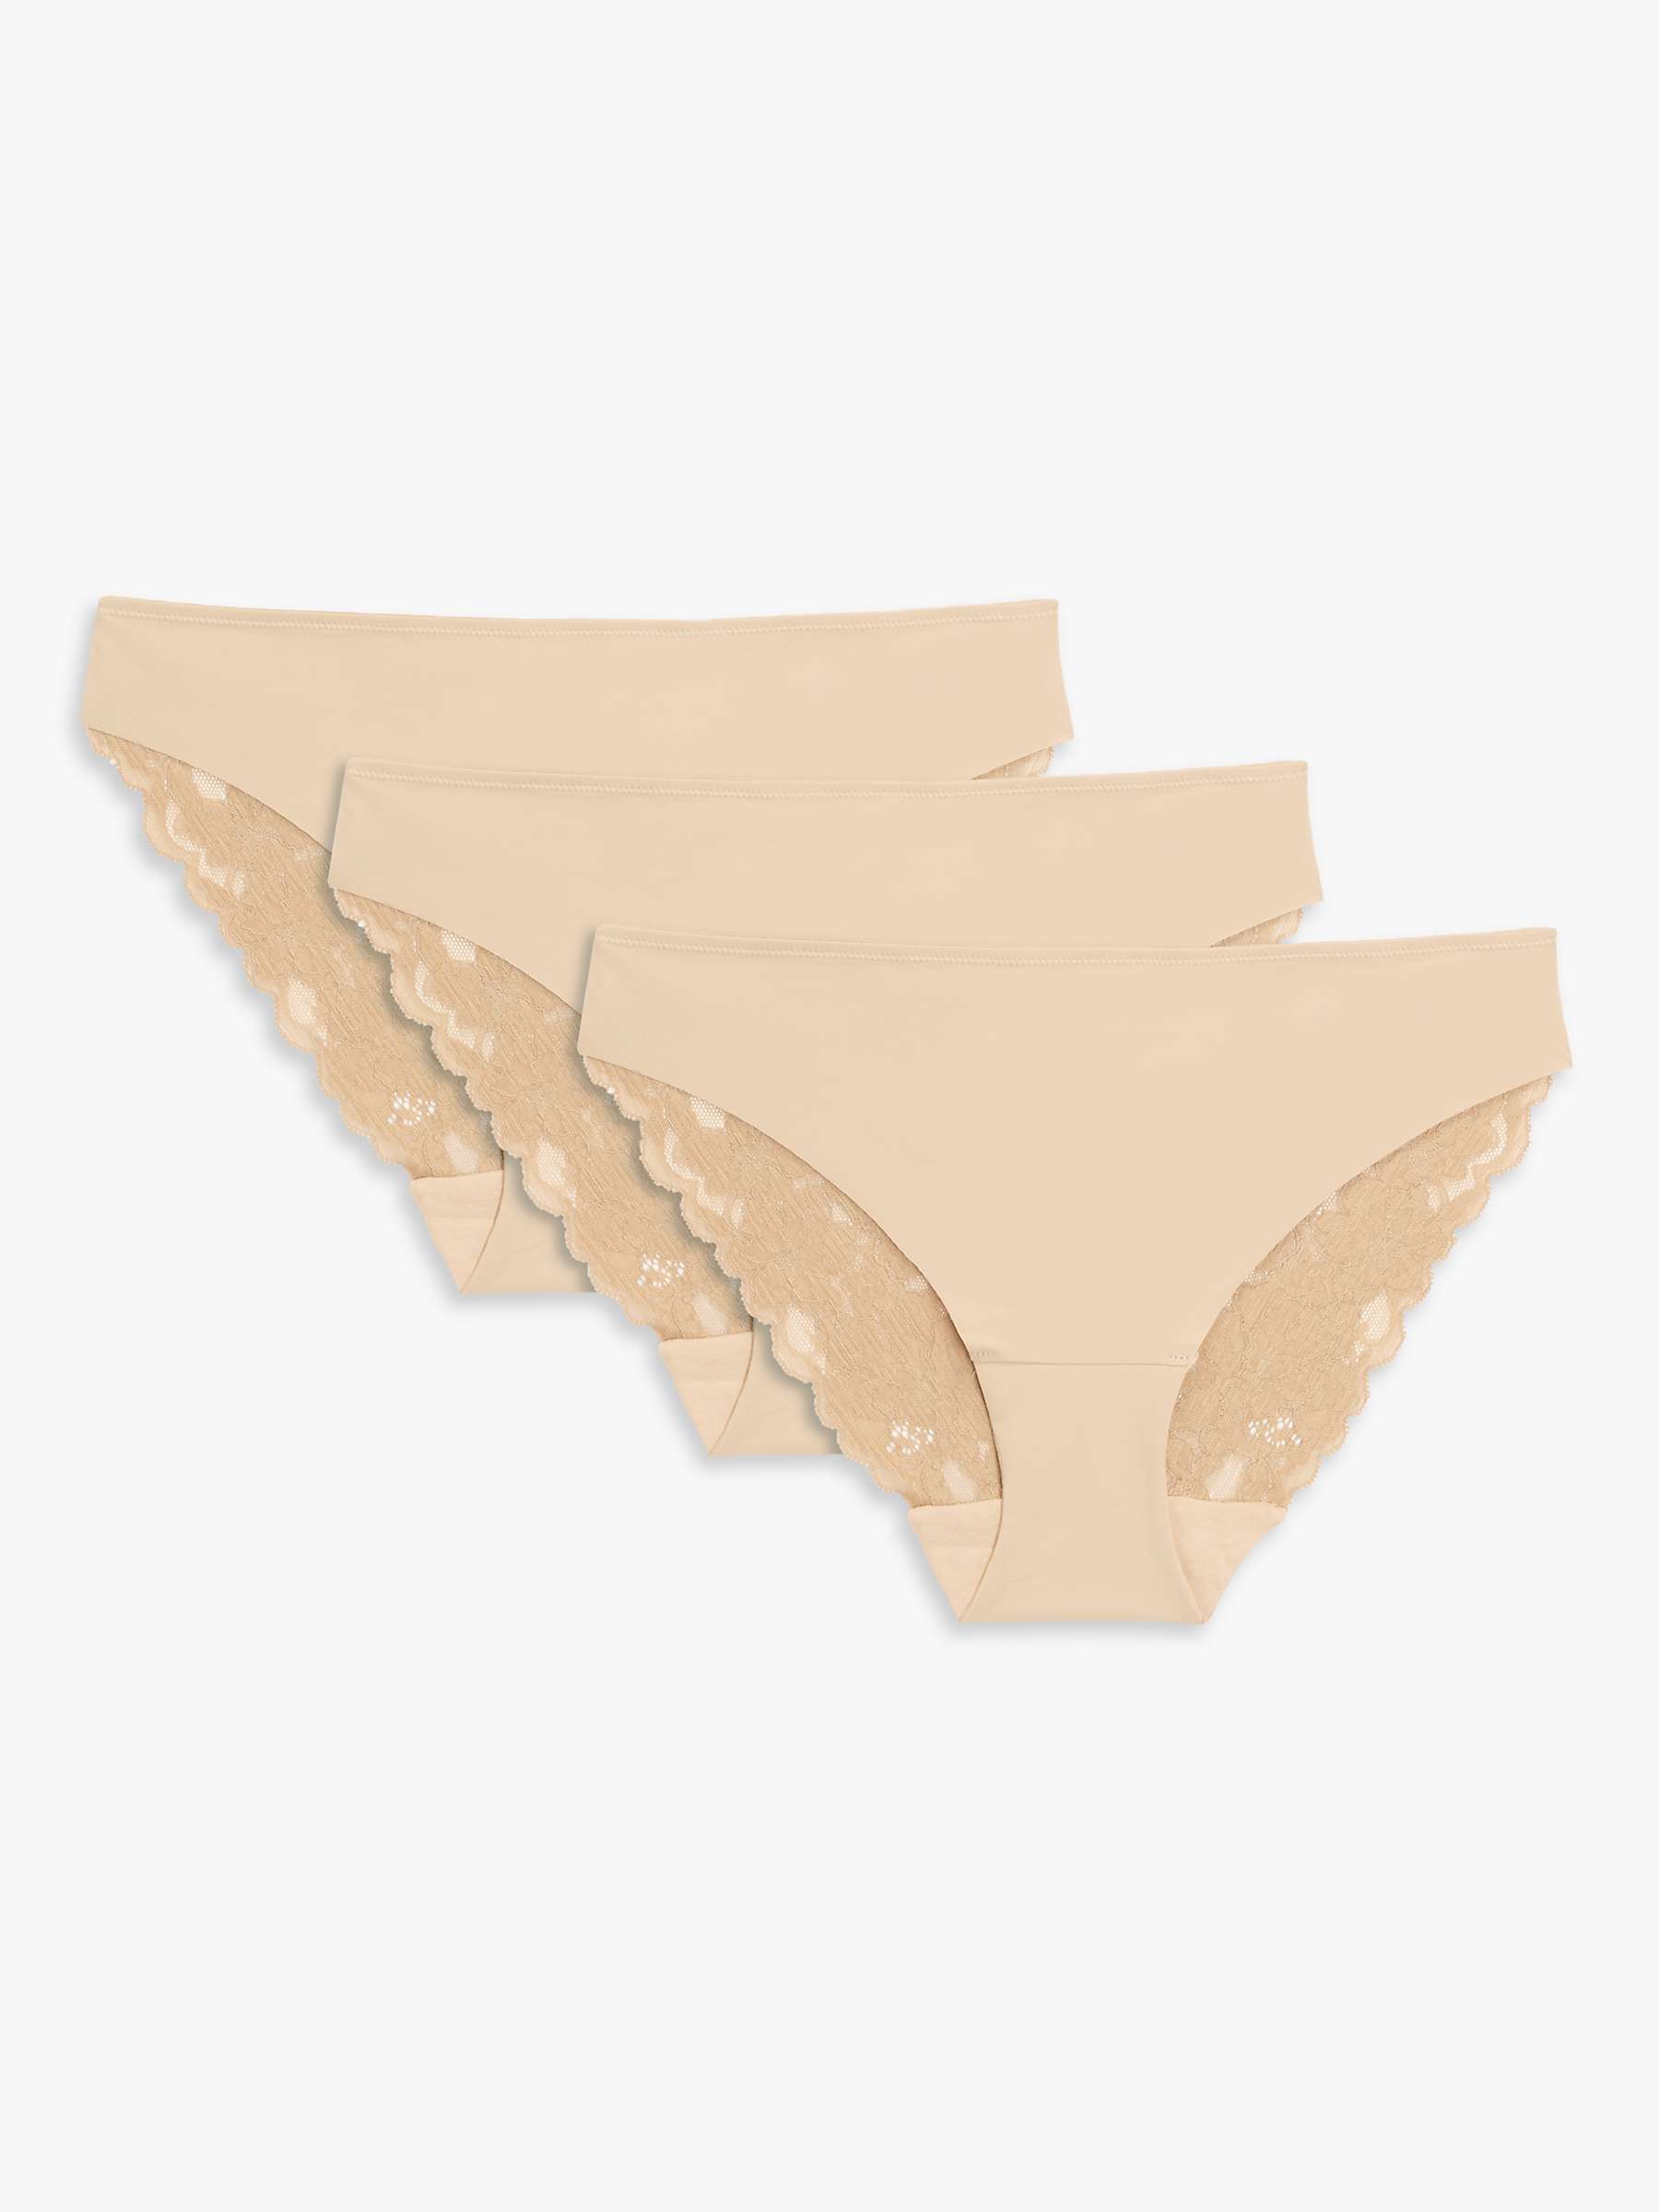 Buy John Lewis ANYDAY Microfibre Lace Bikini Knickers, Pack of 3 Online at johnlewis.com